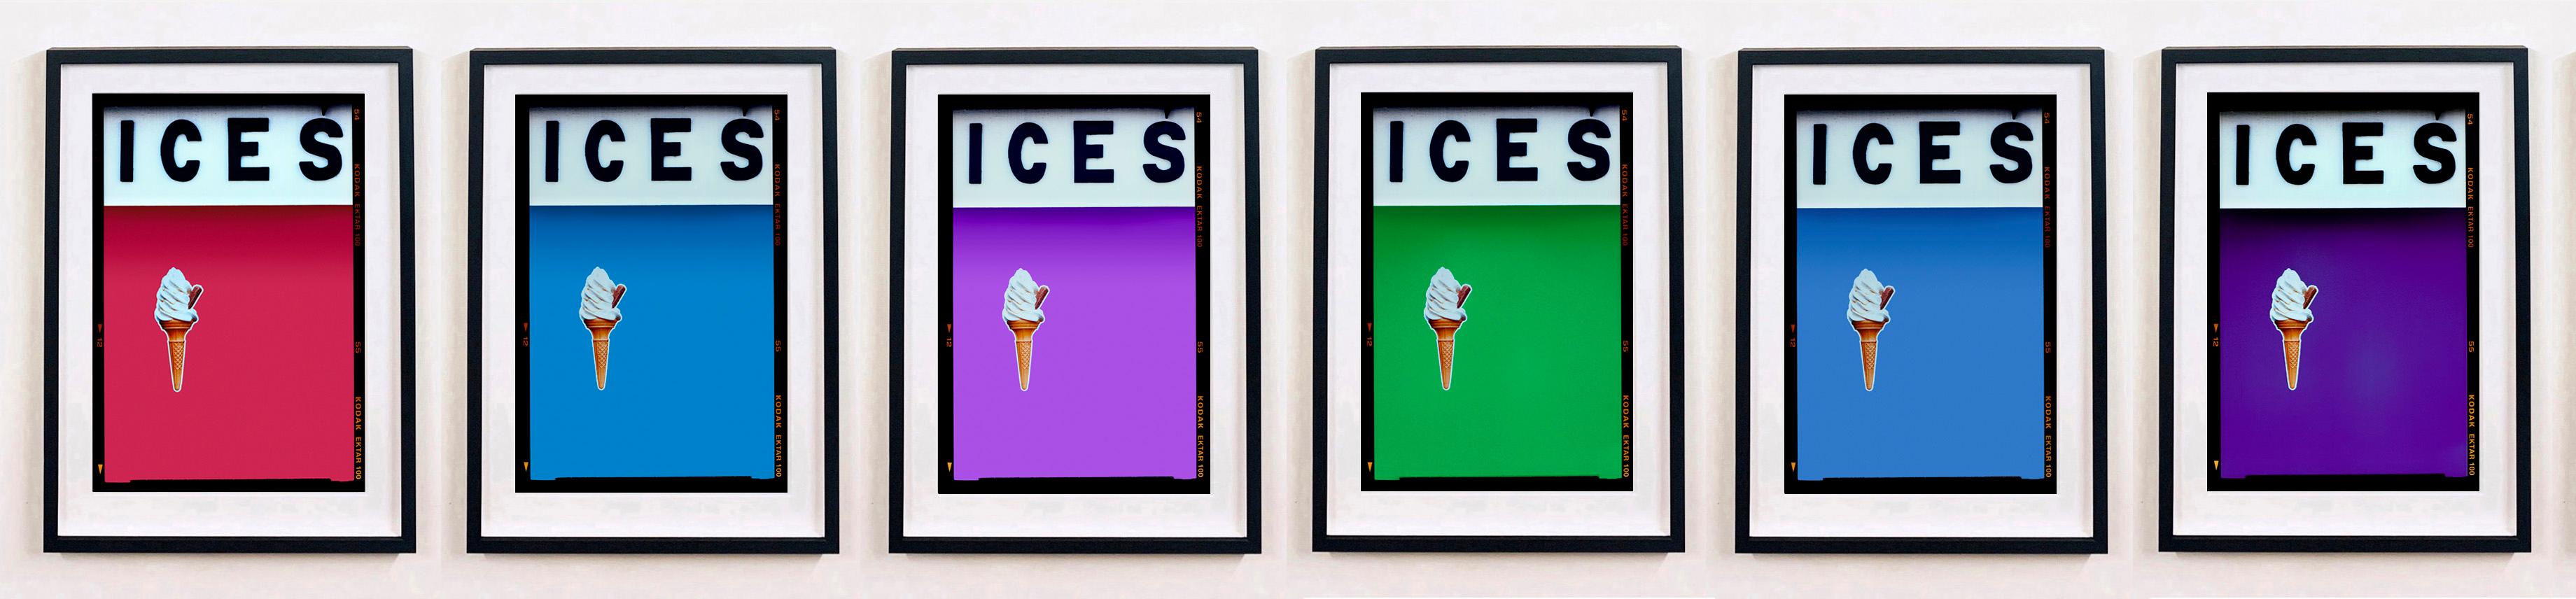 Ices (Purple), Bexhill-on-Sea - British seaside color photography For Sale 3